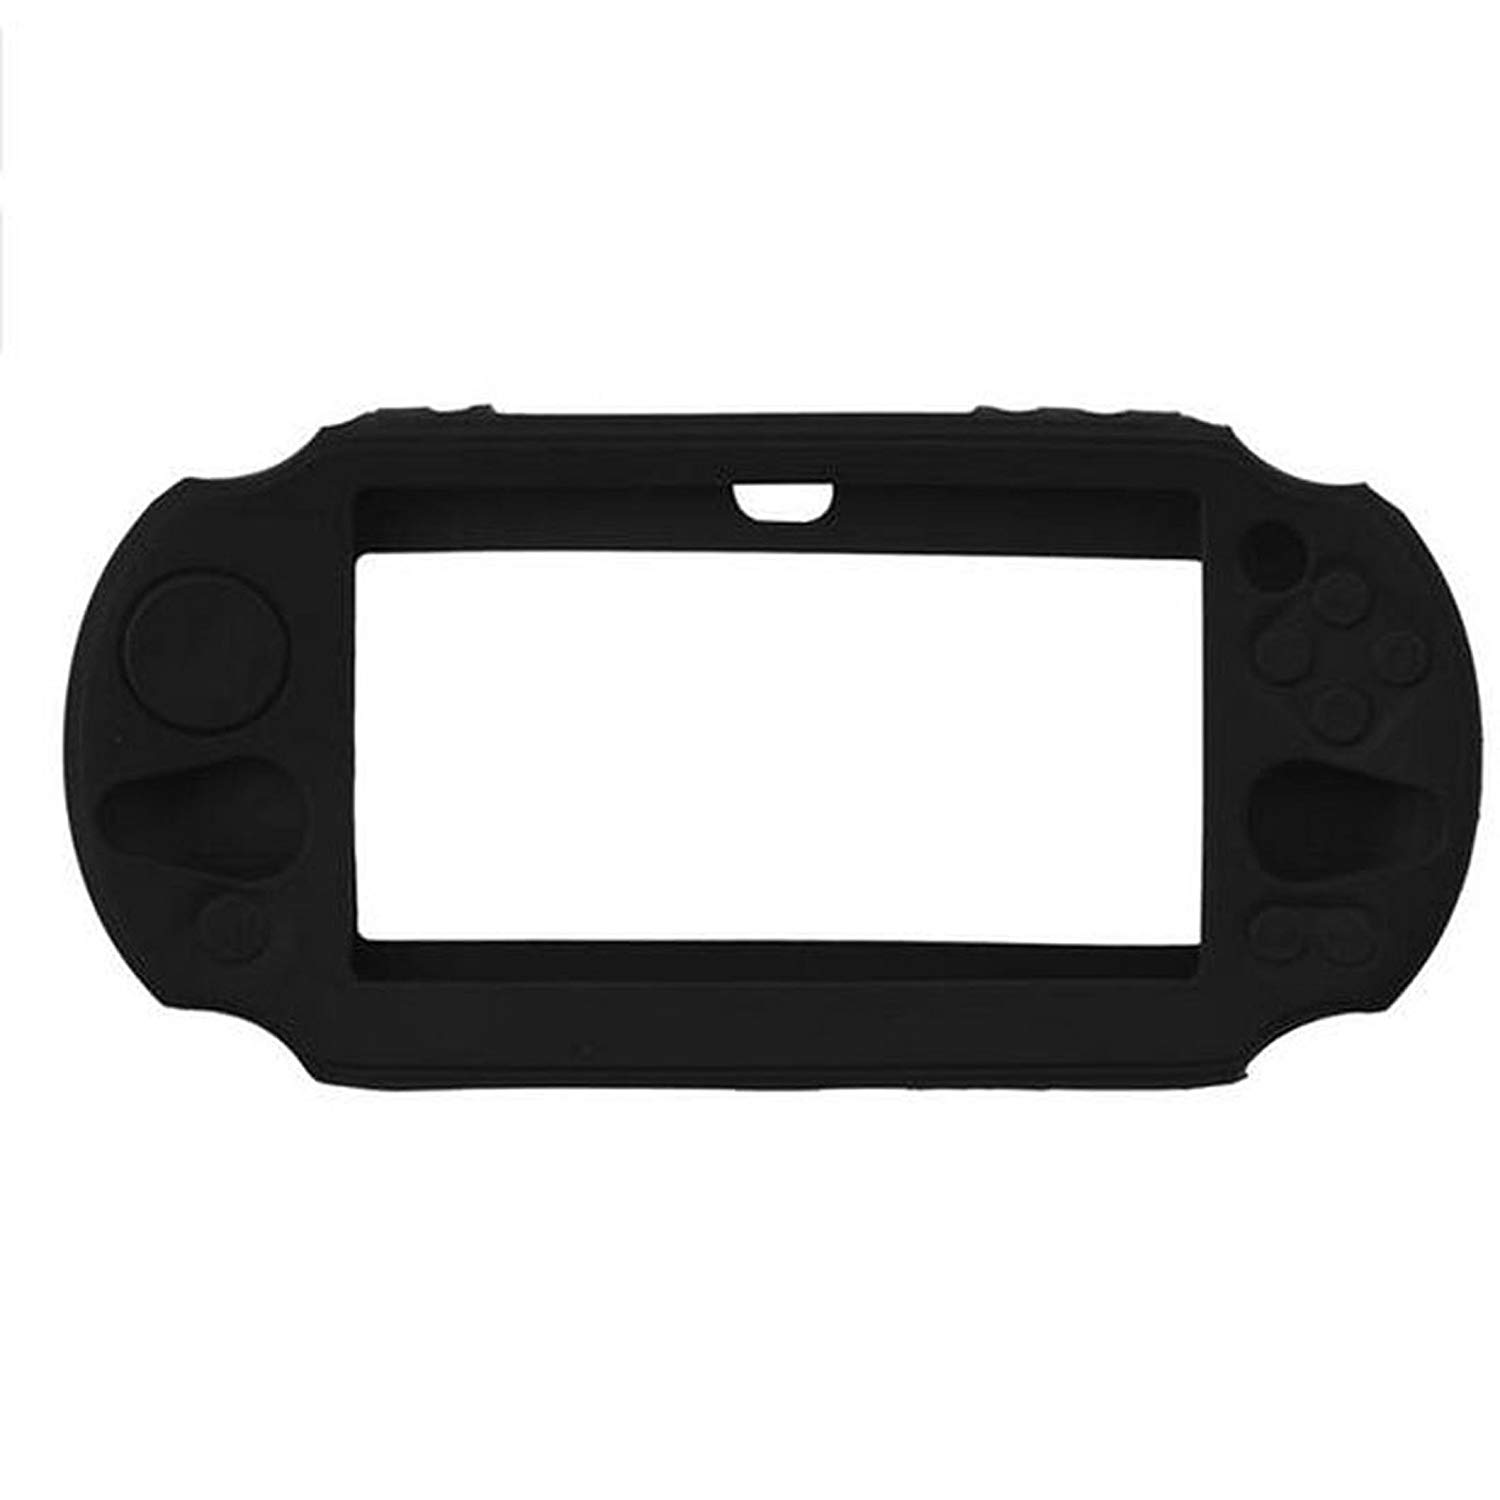 Protective Silicone Skin Case Cover for Sony Playstation PS VITA slim 2000 mode White or Black color [video game]